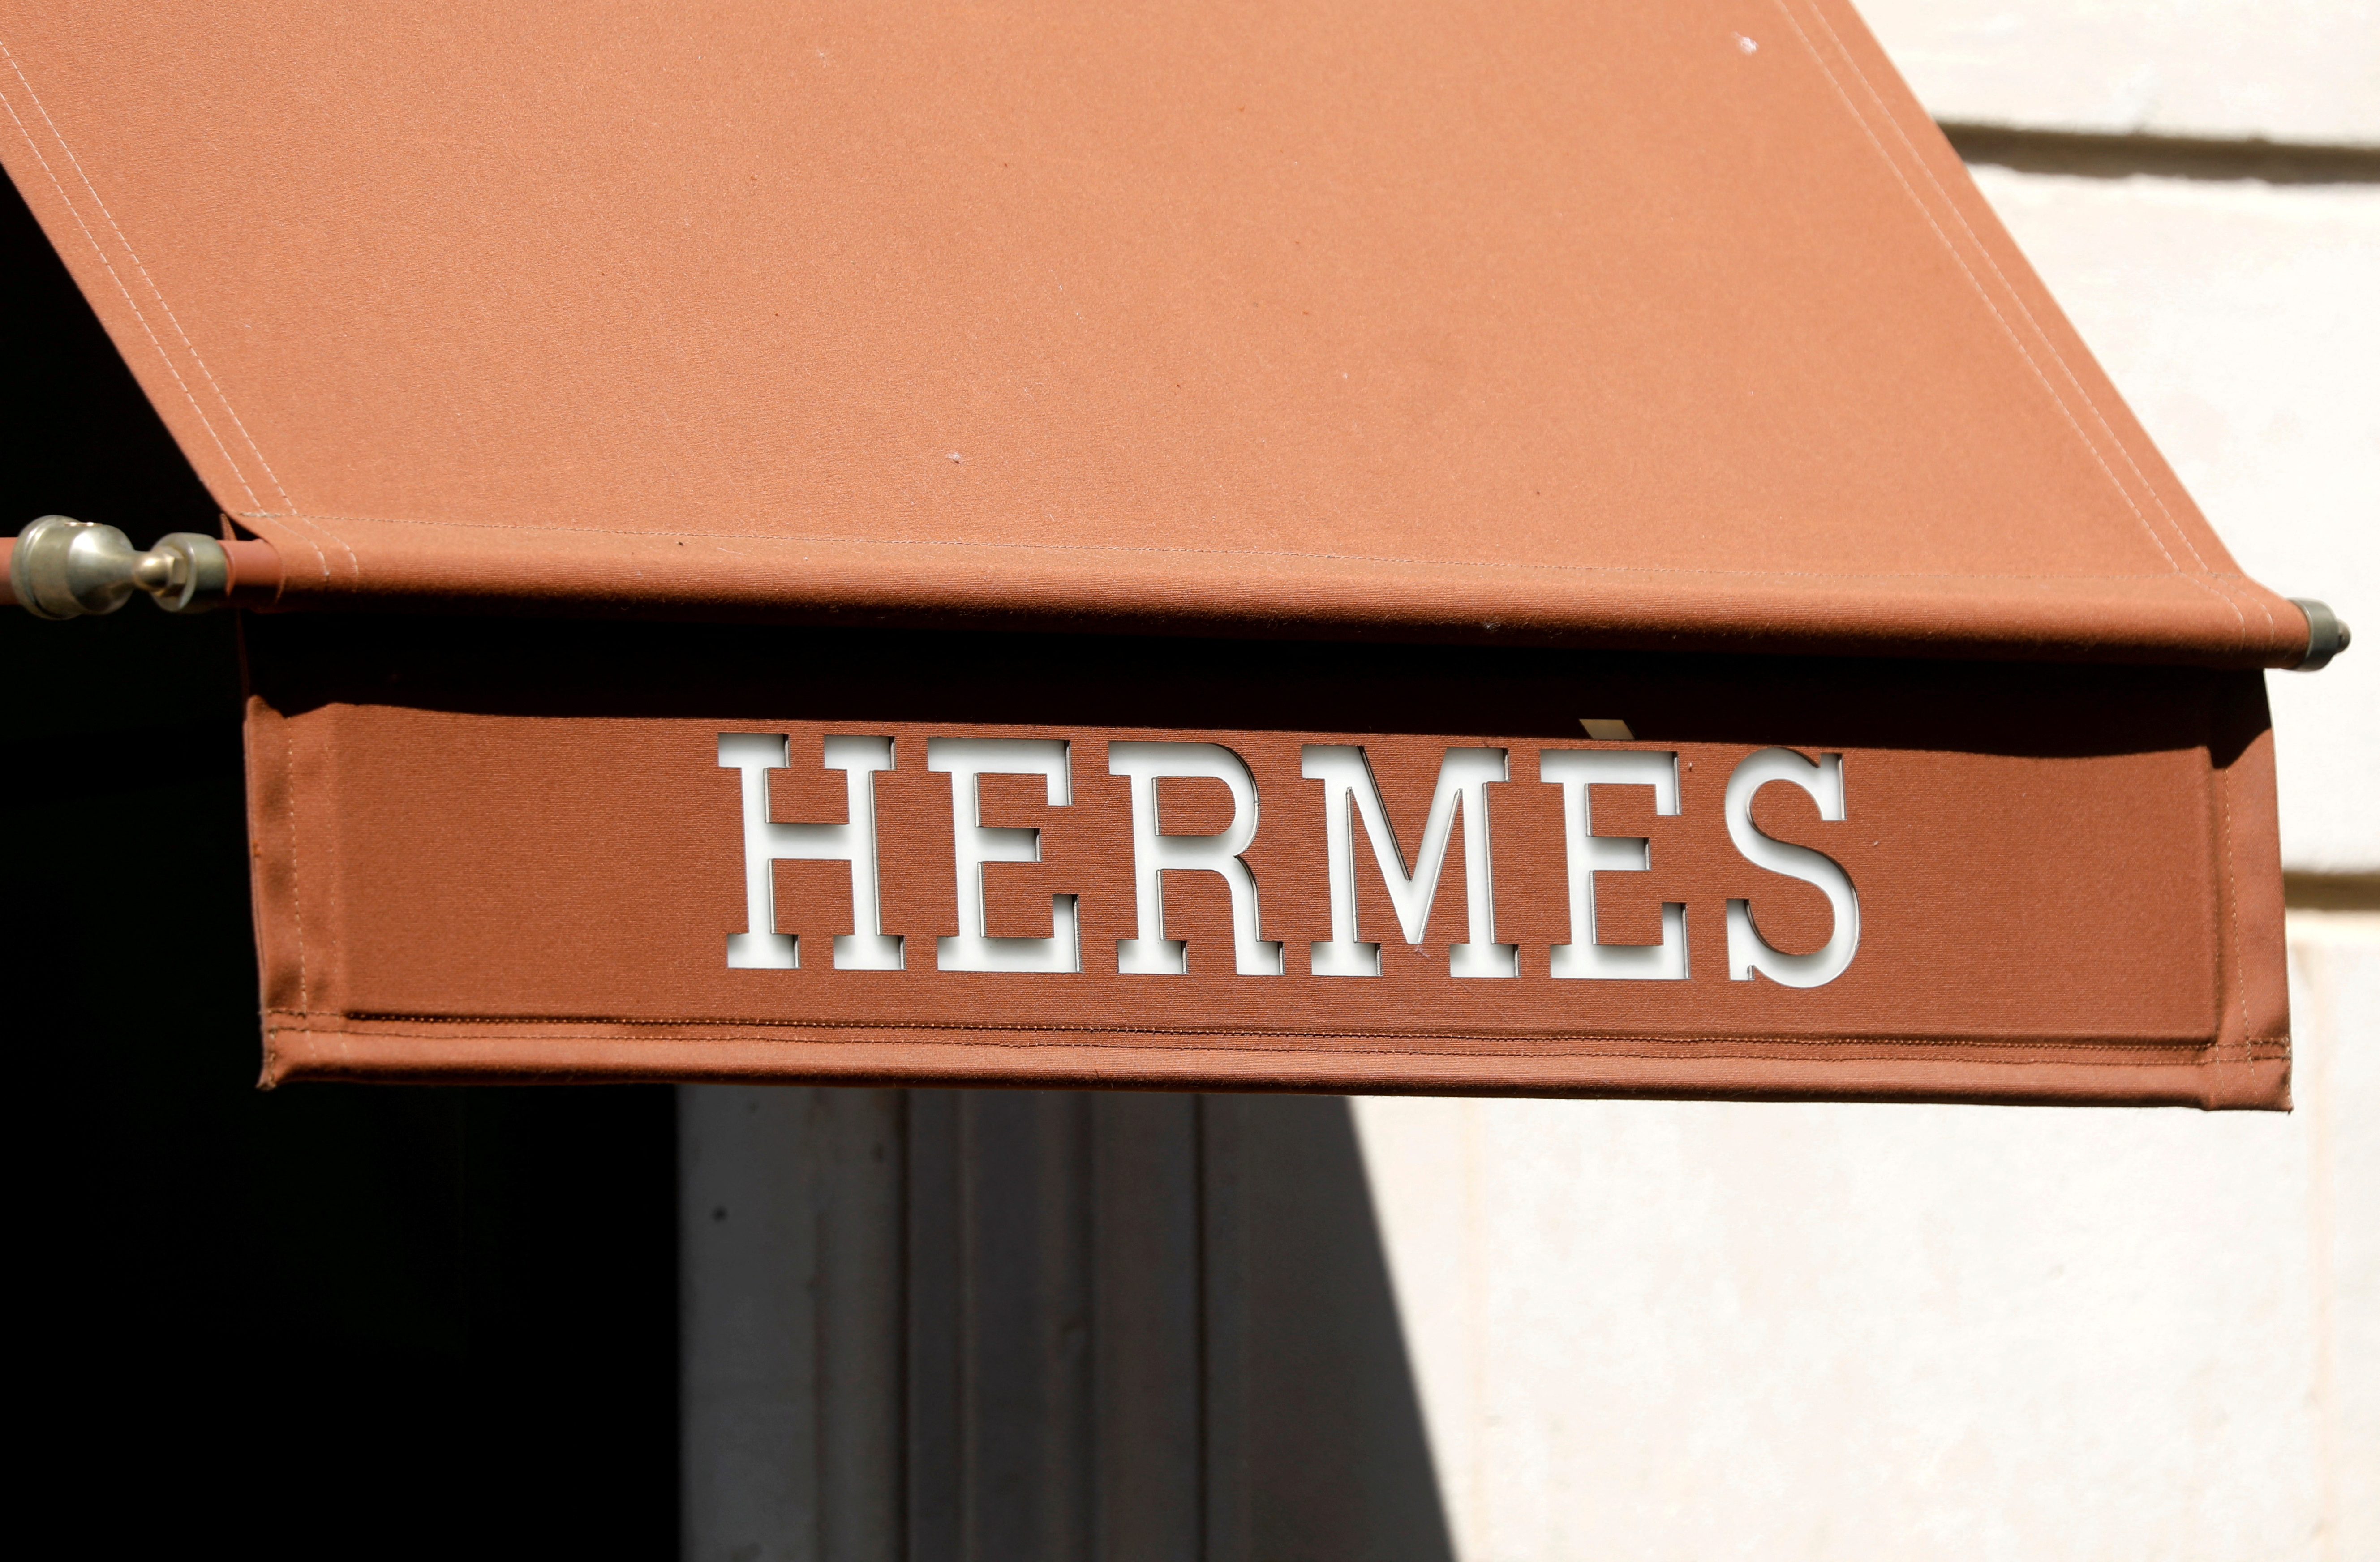 Hermès is Not Interested in Resale, Says CEO